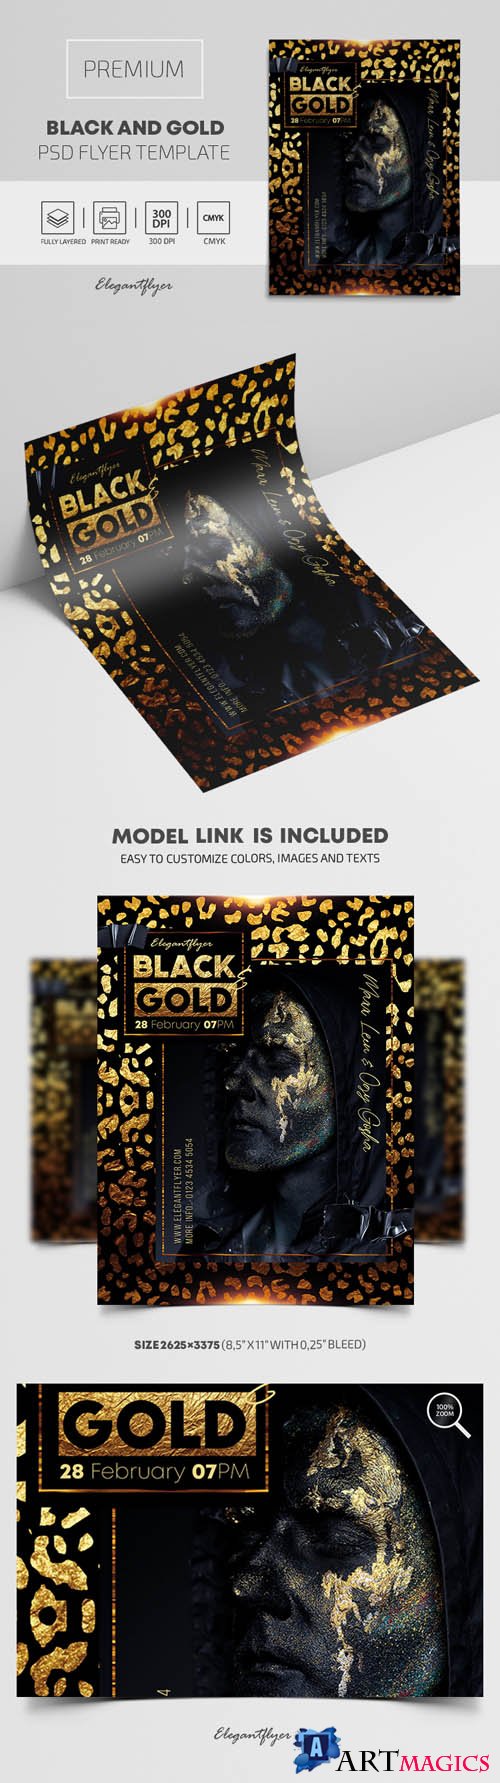 Black and Gold Premium PSD Flyer Template